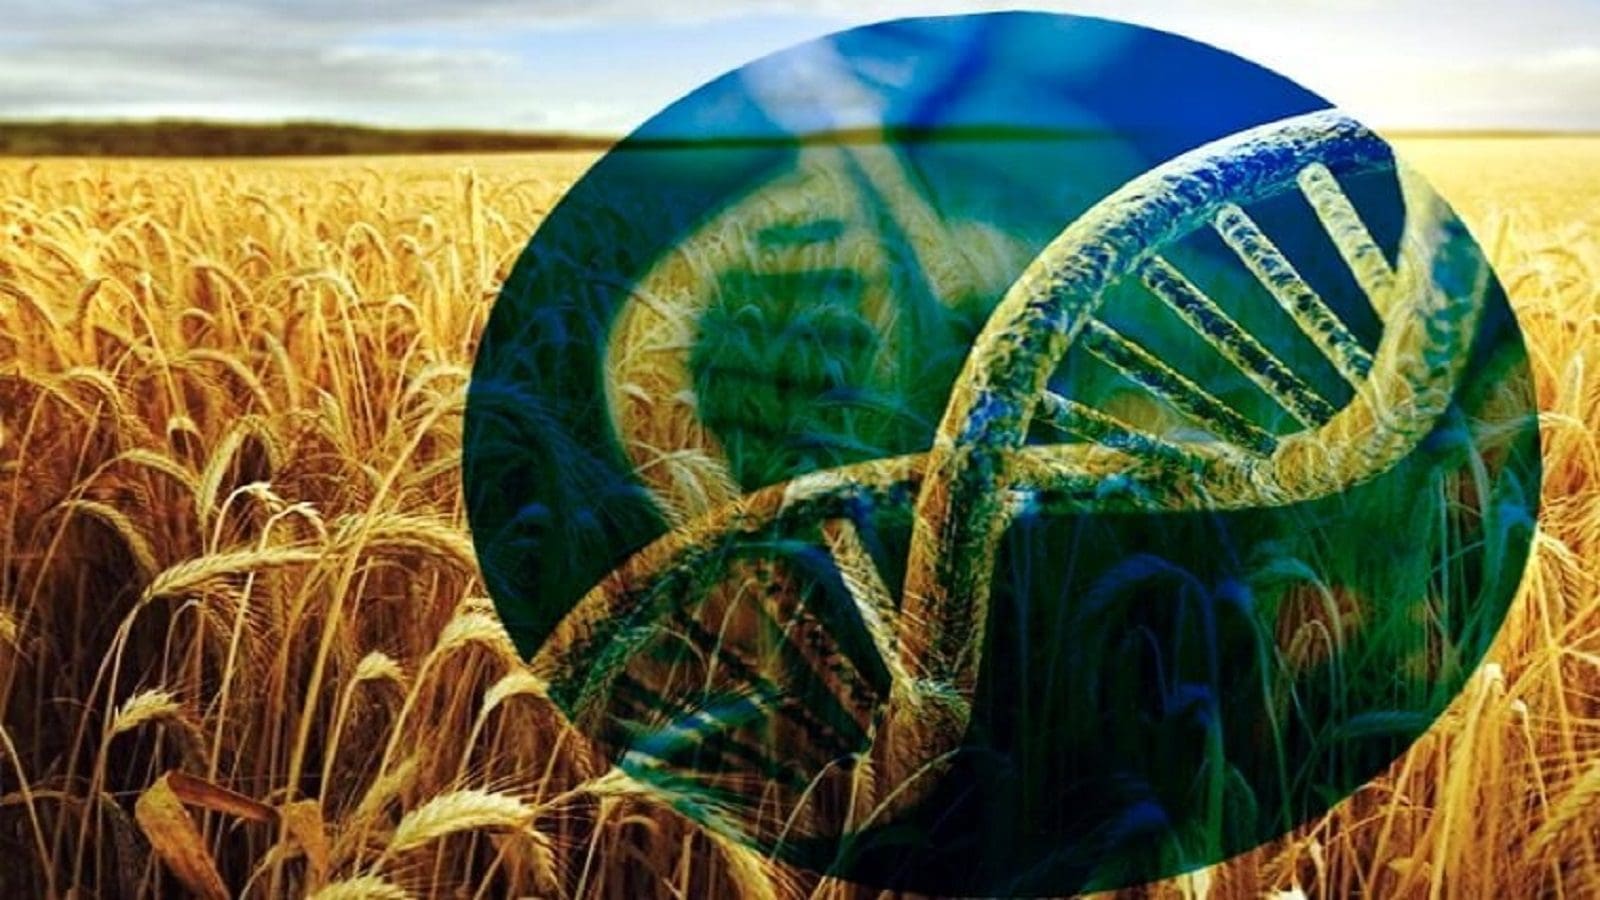 Argentine Bioceres to bolster drought-resistant HB4 wheat sales through marketing partnerships